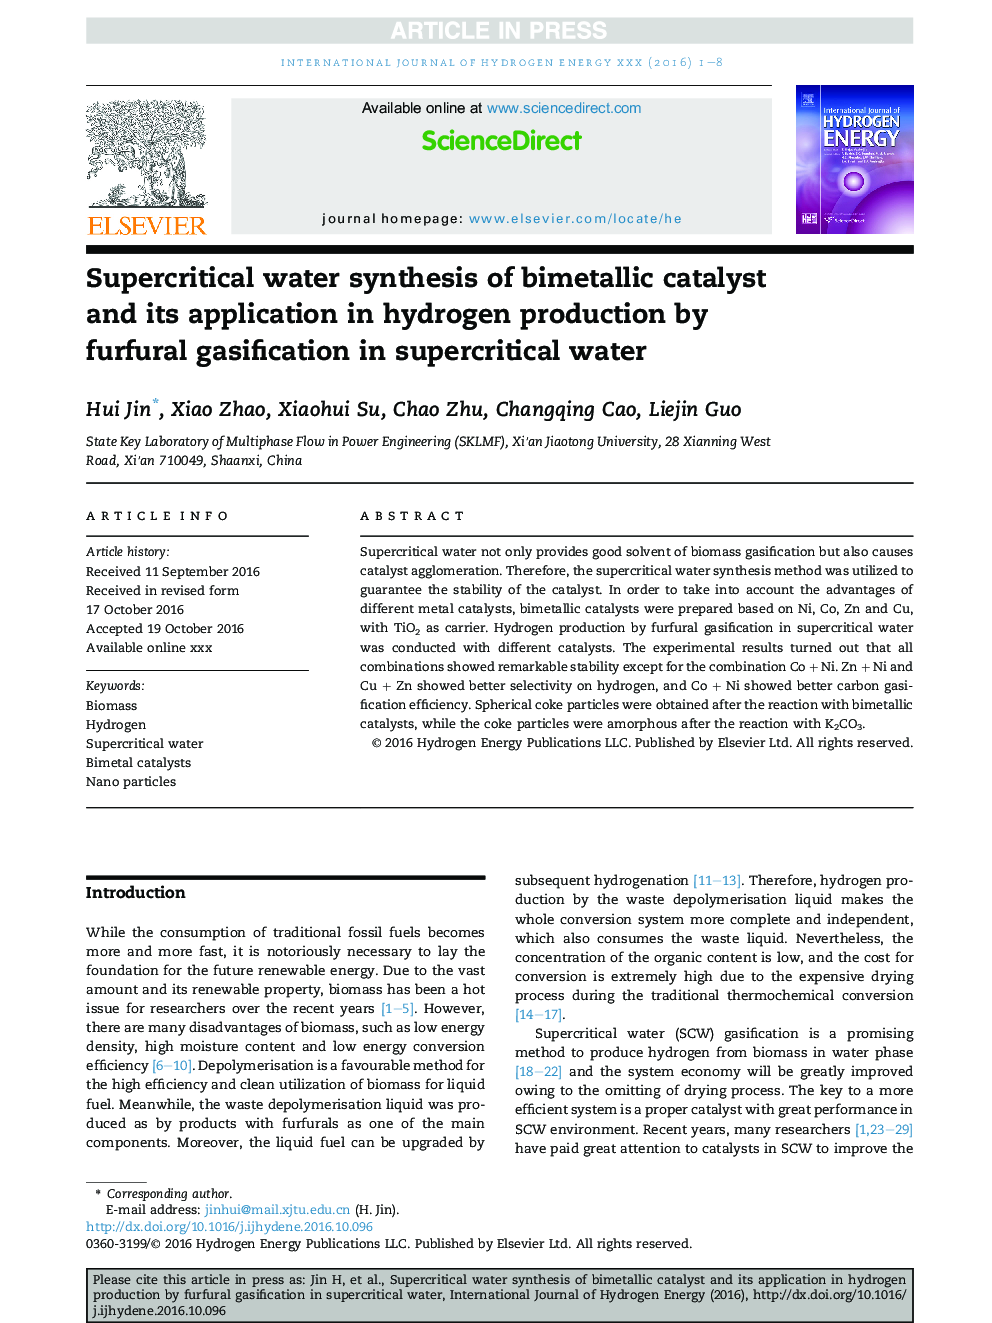 Supercritical water synthesis of bimetallic catalyst and its application in hydrogen production by furfural gasification in supercritical water